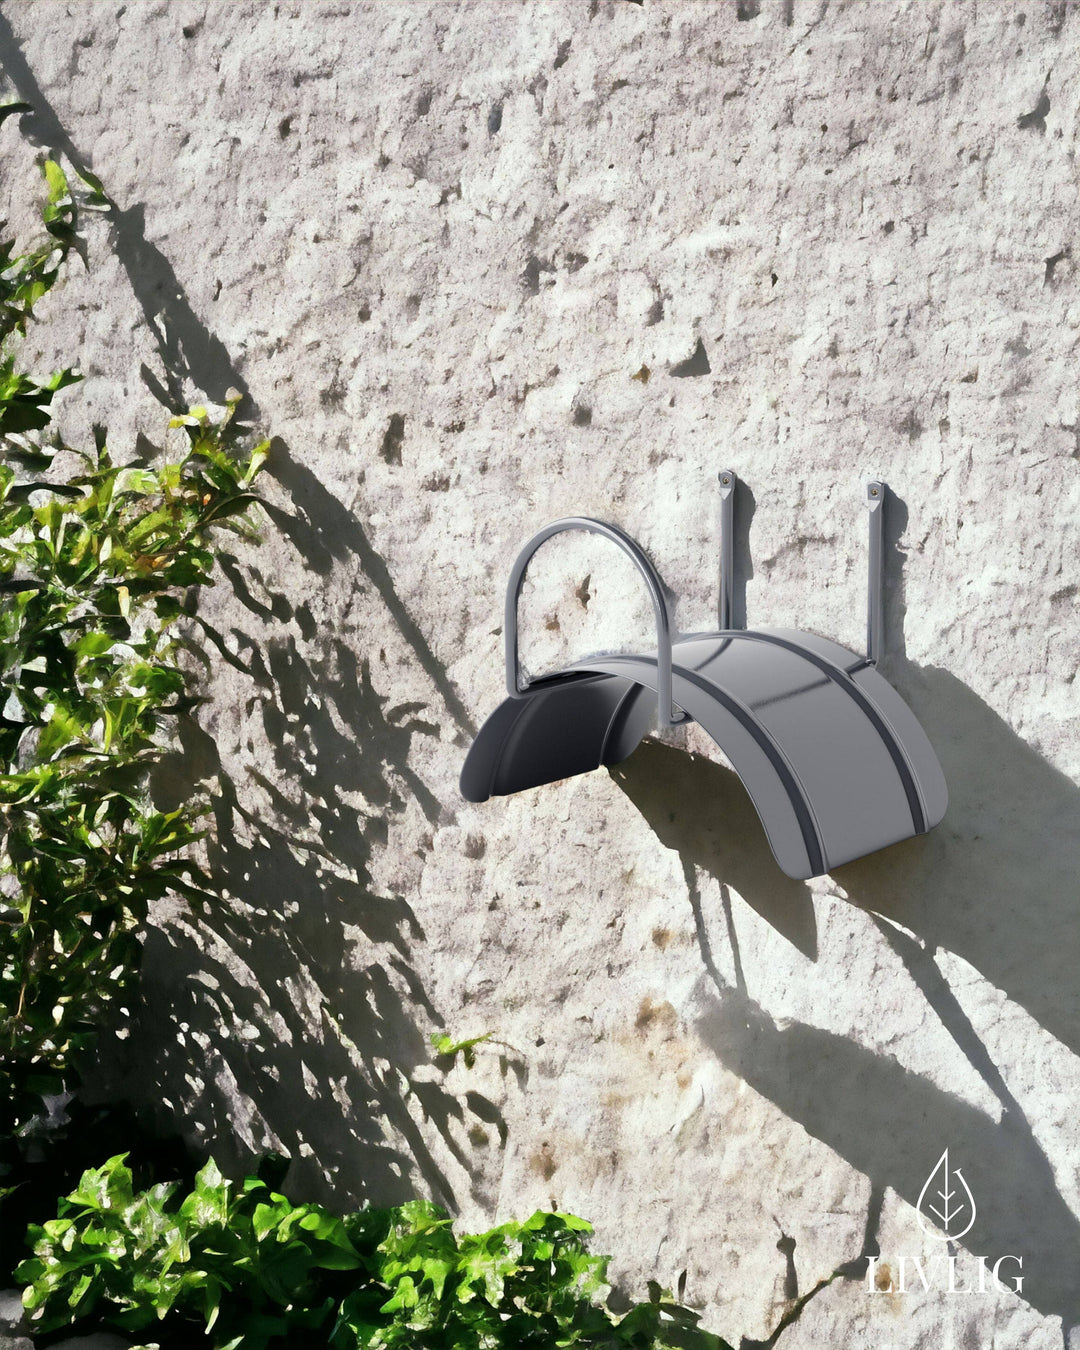 a wall mounted umbrella on the side of a building